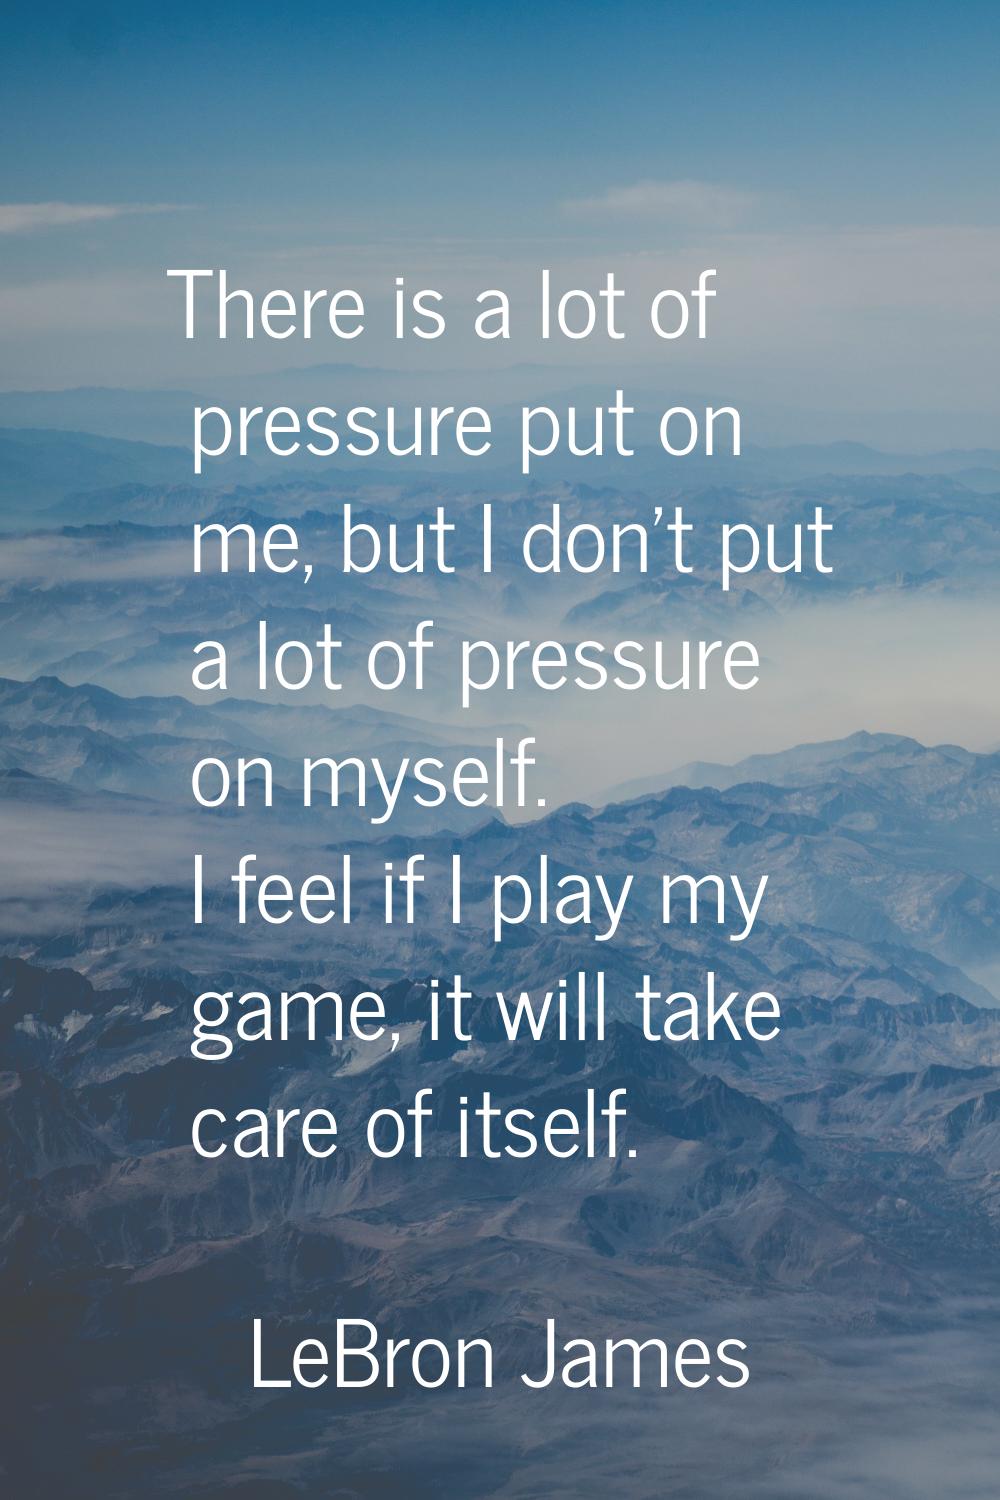 There is a lot of pressure put on me, but I don't put a lot of pressure on myself. I feel if I play